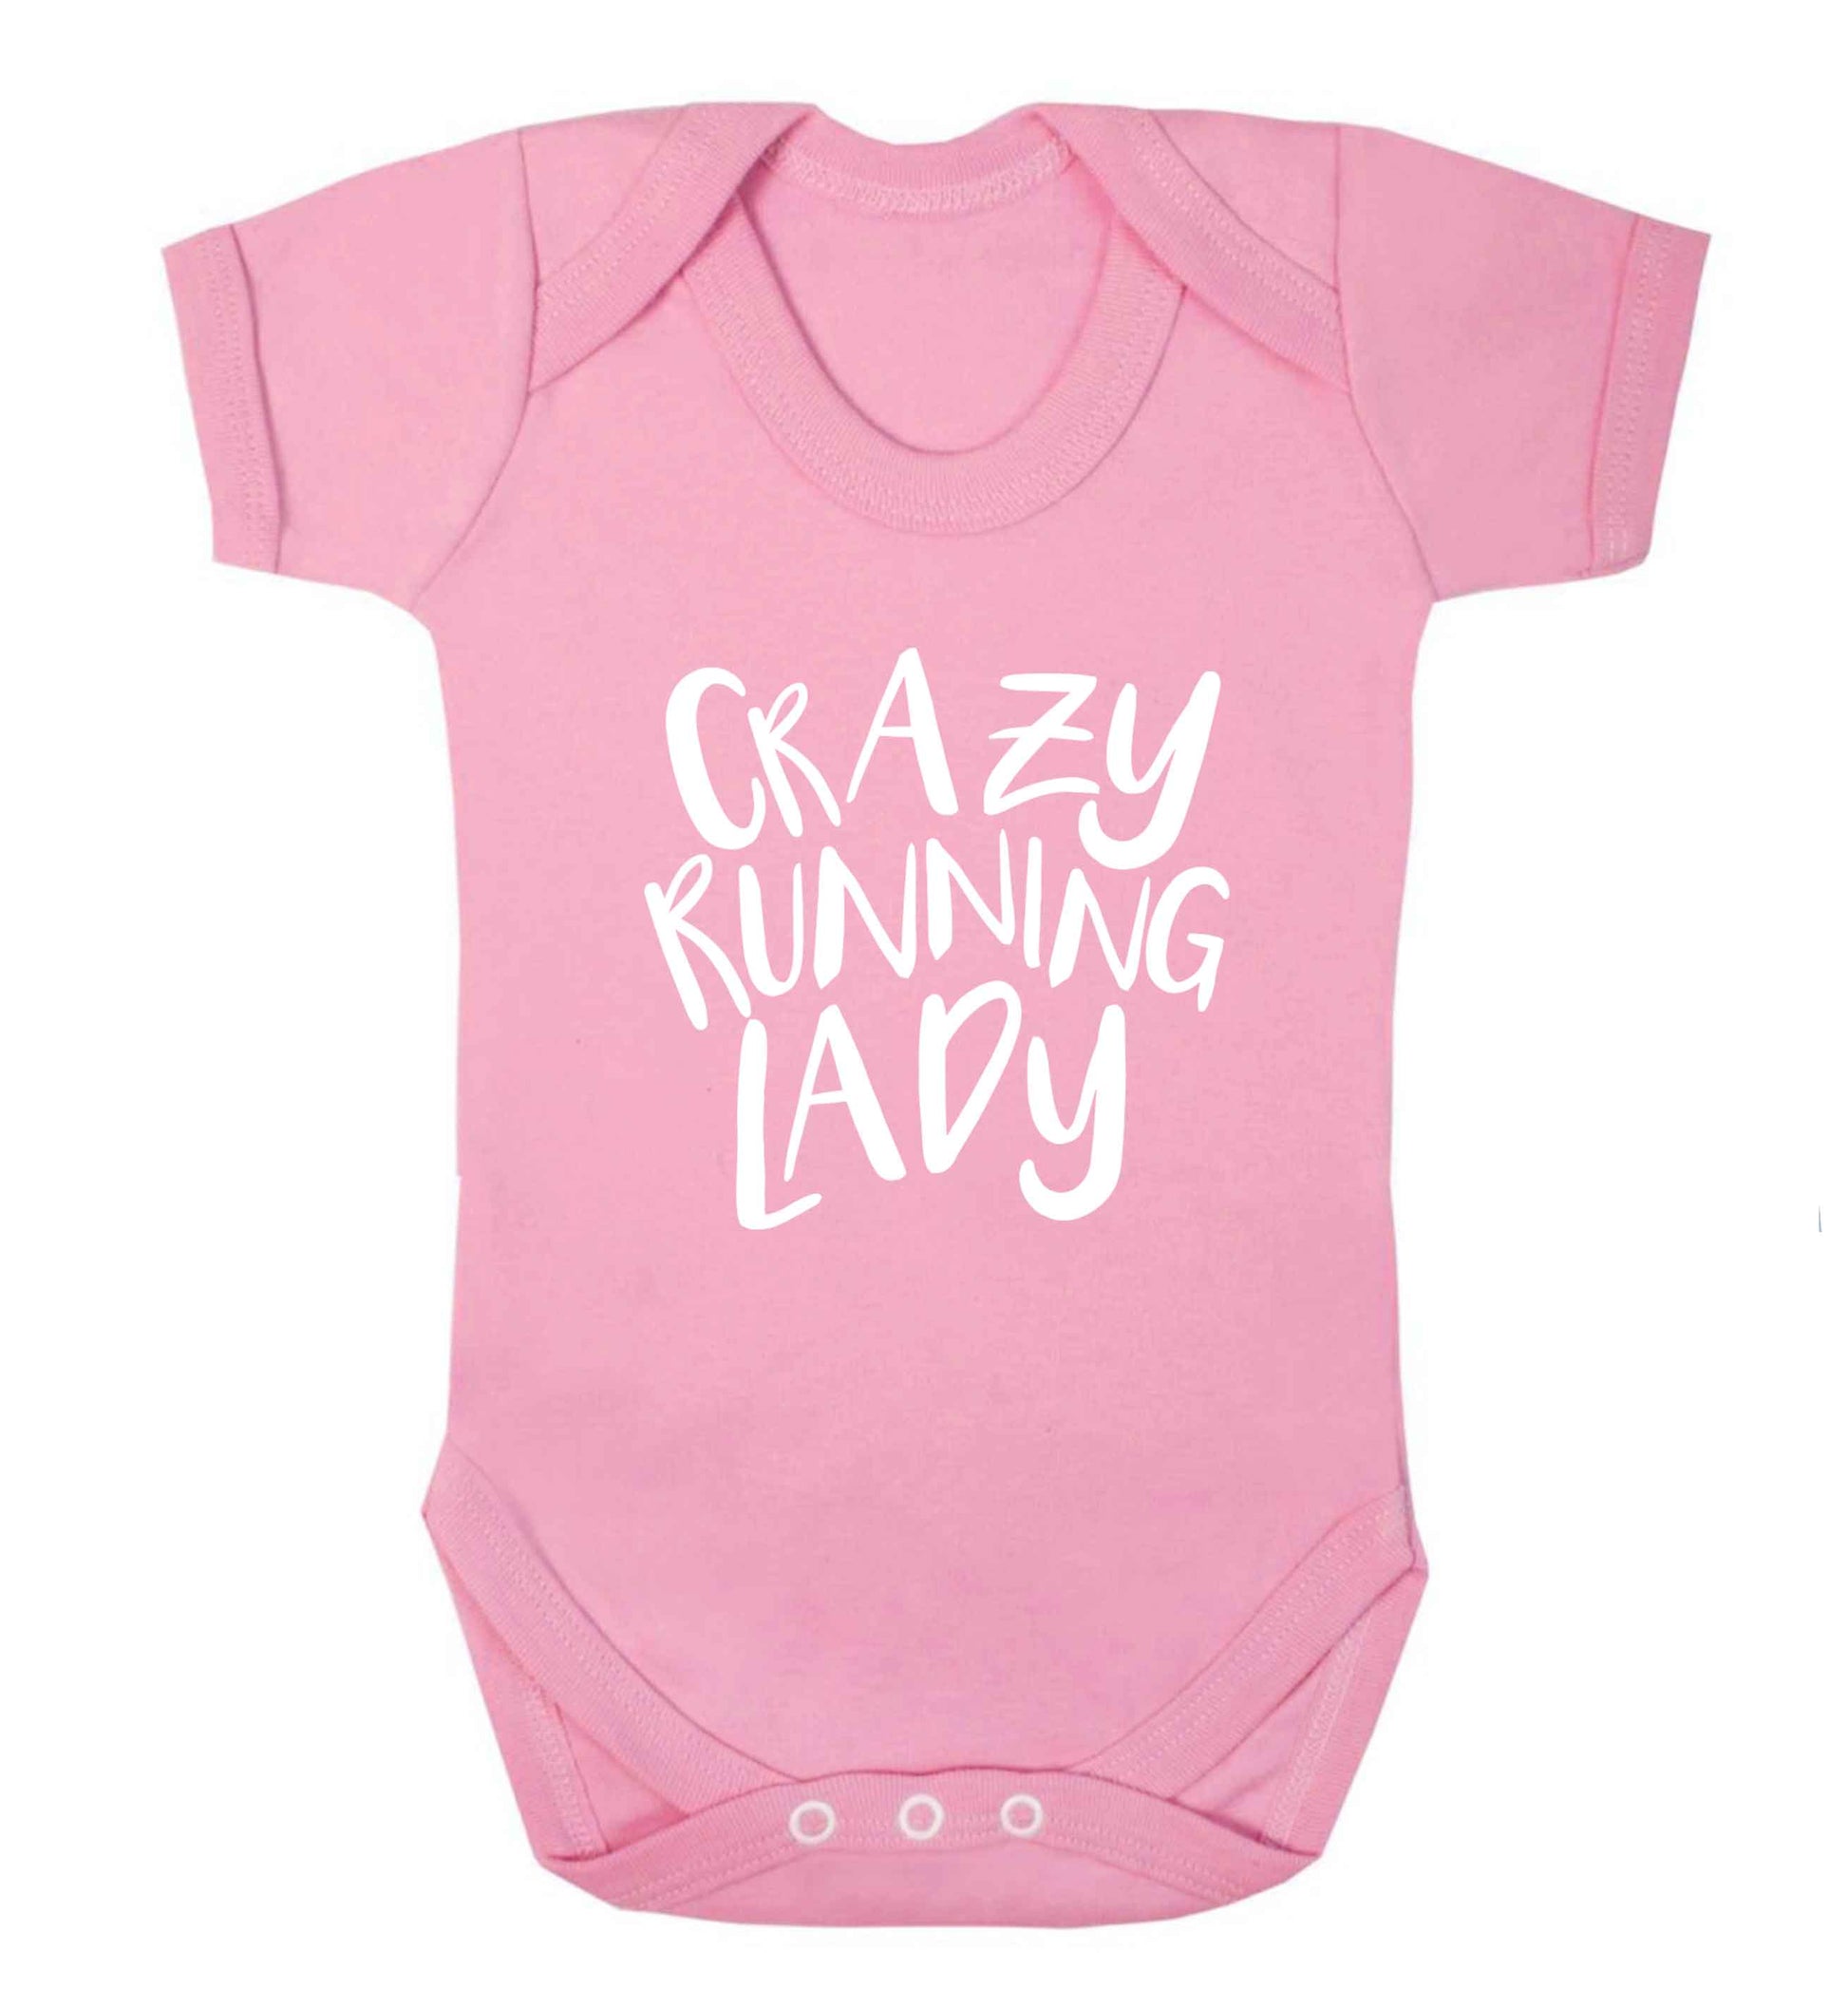 Crazy running lady baby vest pale pink 18-24 months